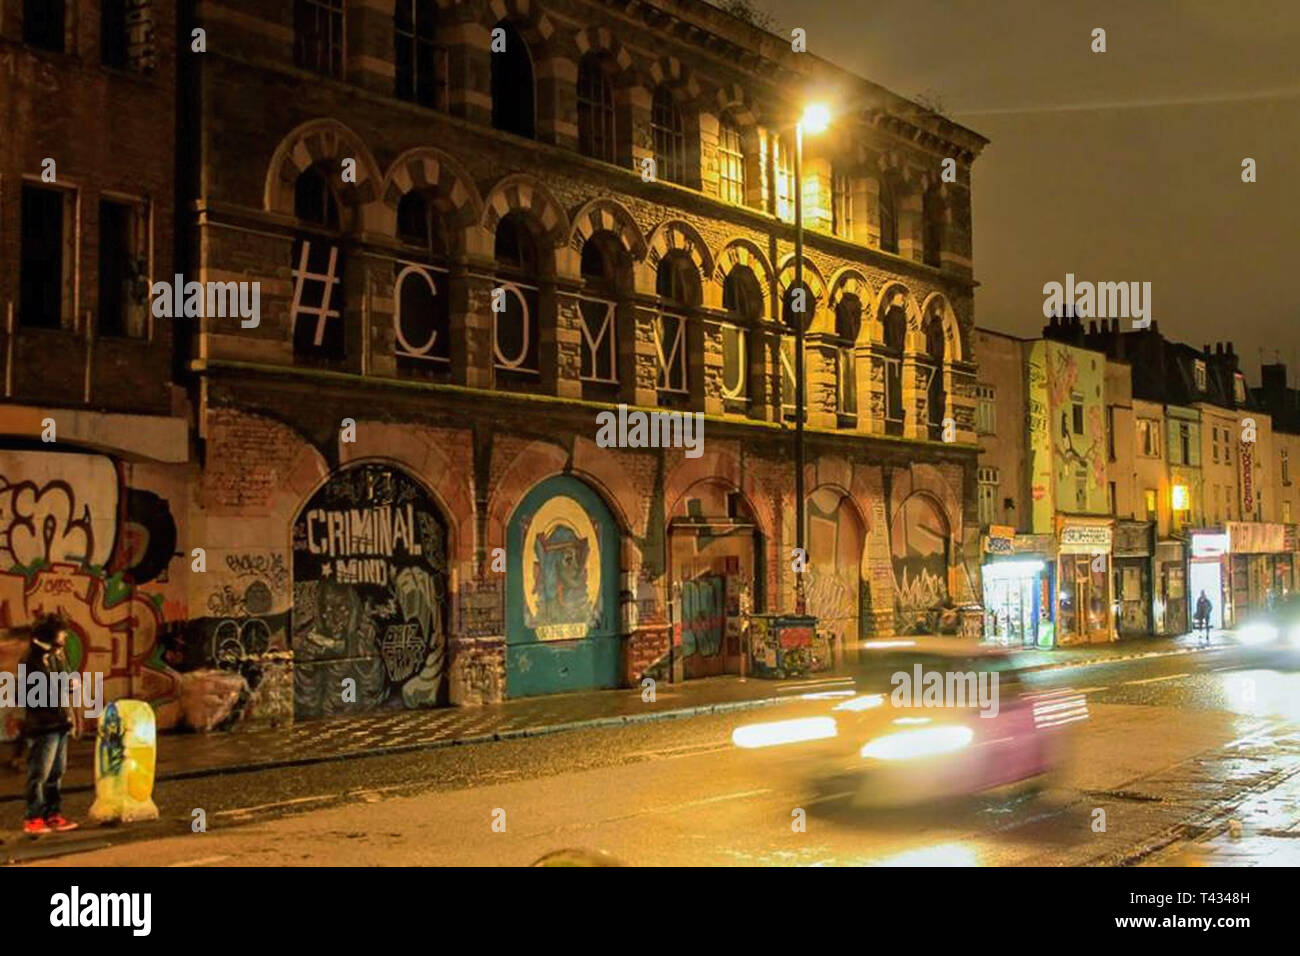 Old building with graffitis in Bristol, UK Stock Photo